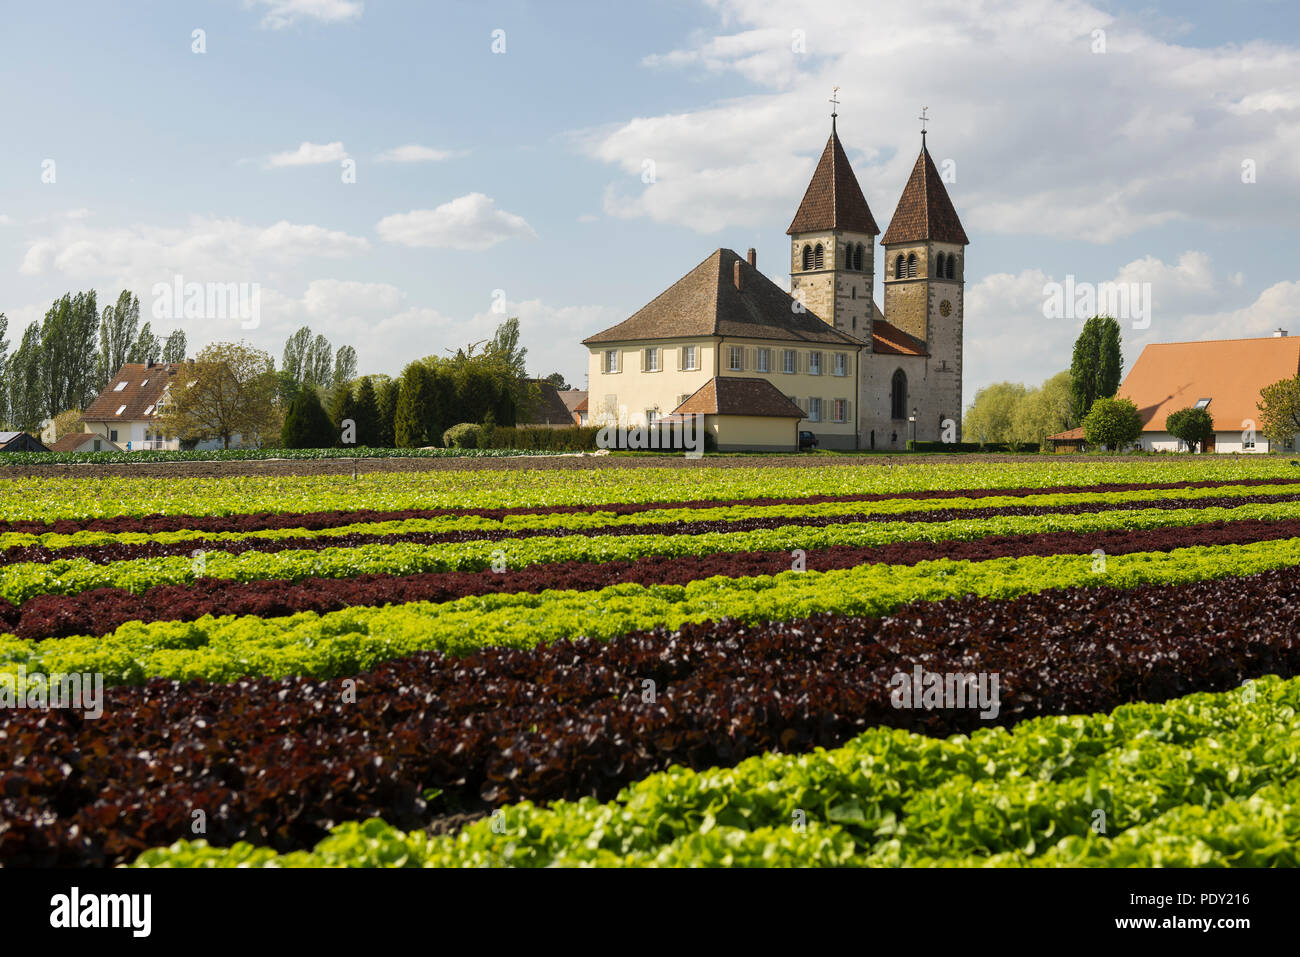 Church of St. Peter and Paul, salad cultivation, Reichenau Island, Lake Constance, Baden-Württemberg, Germany Stock Photo